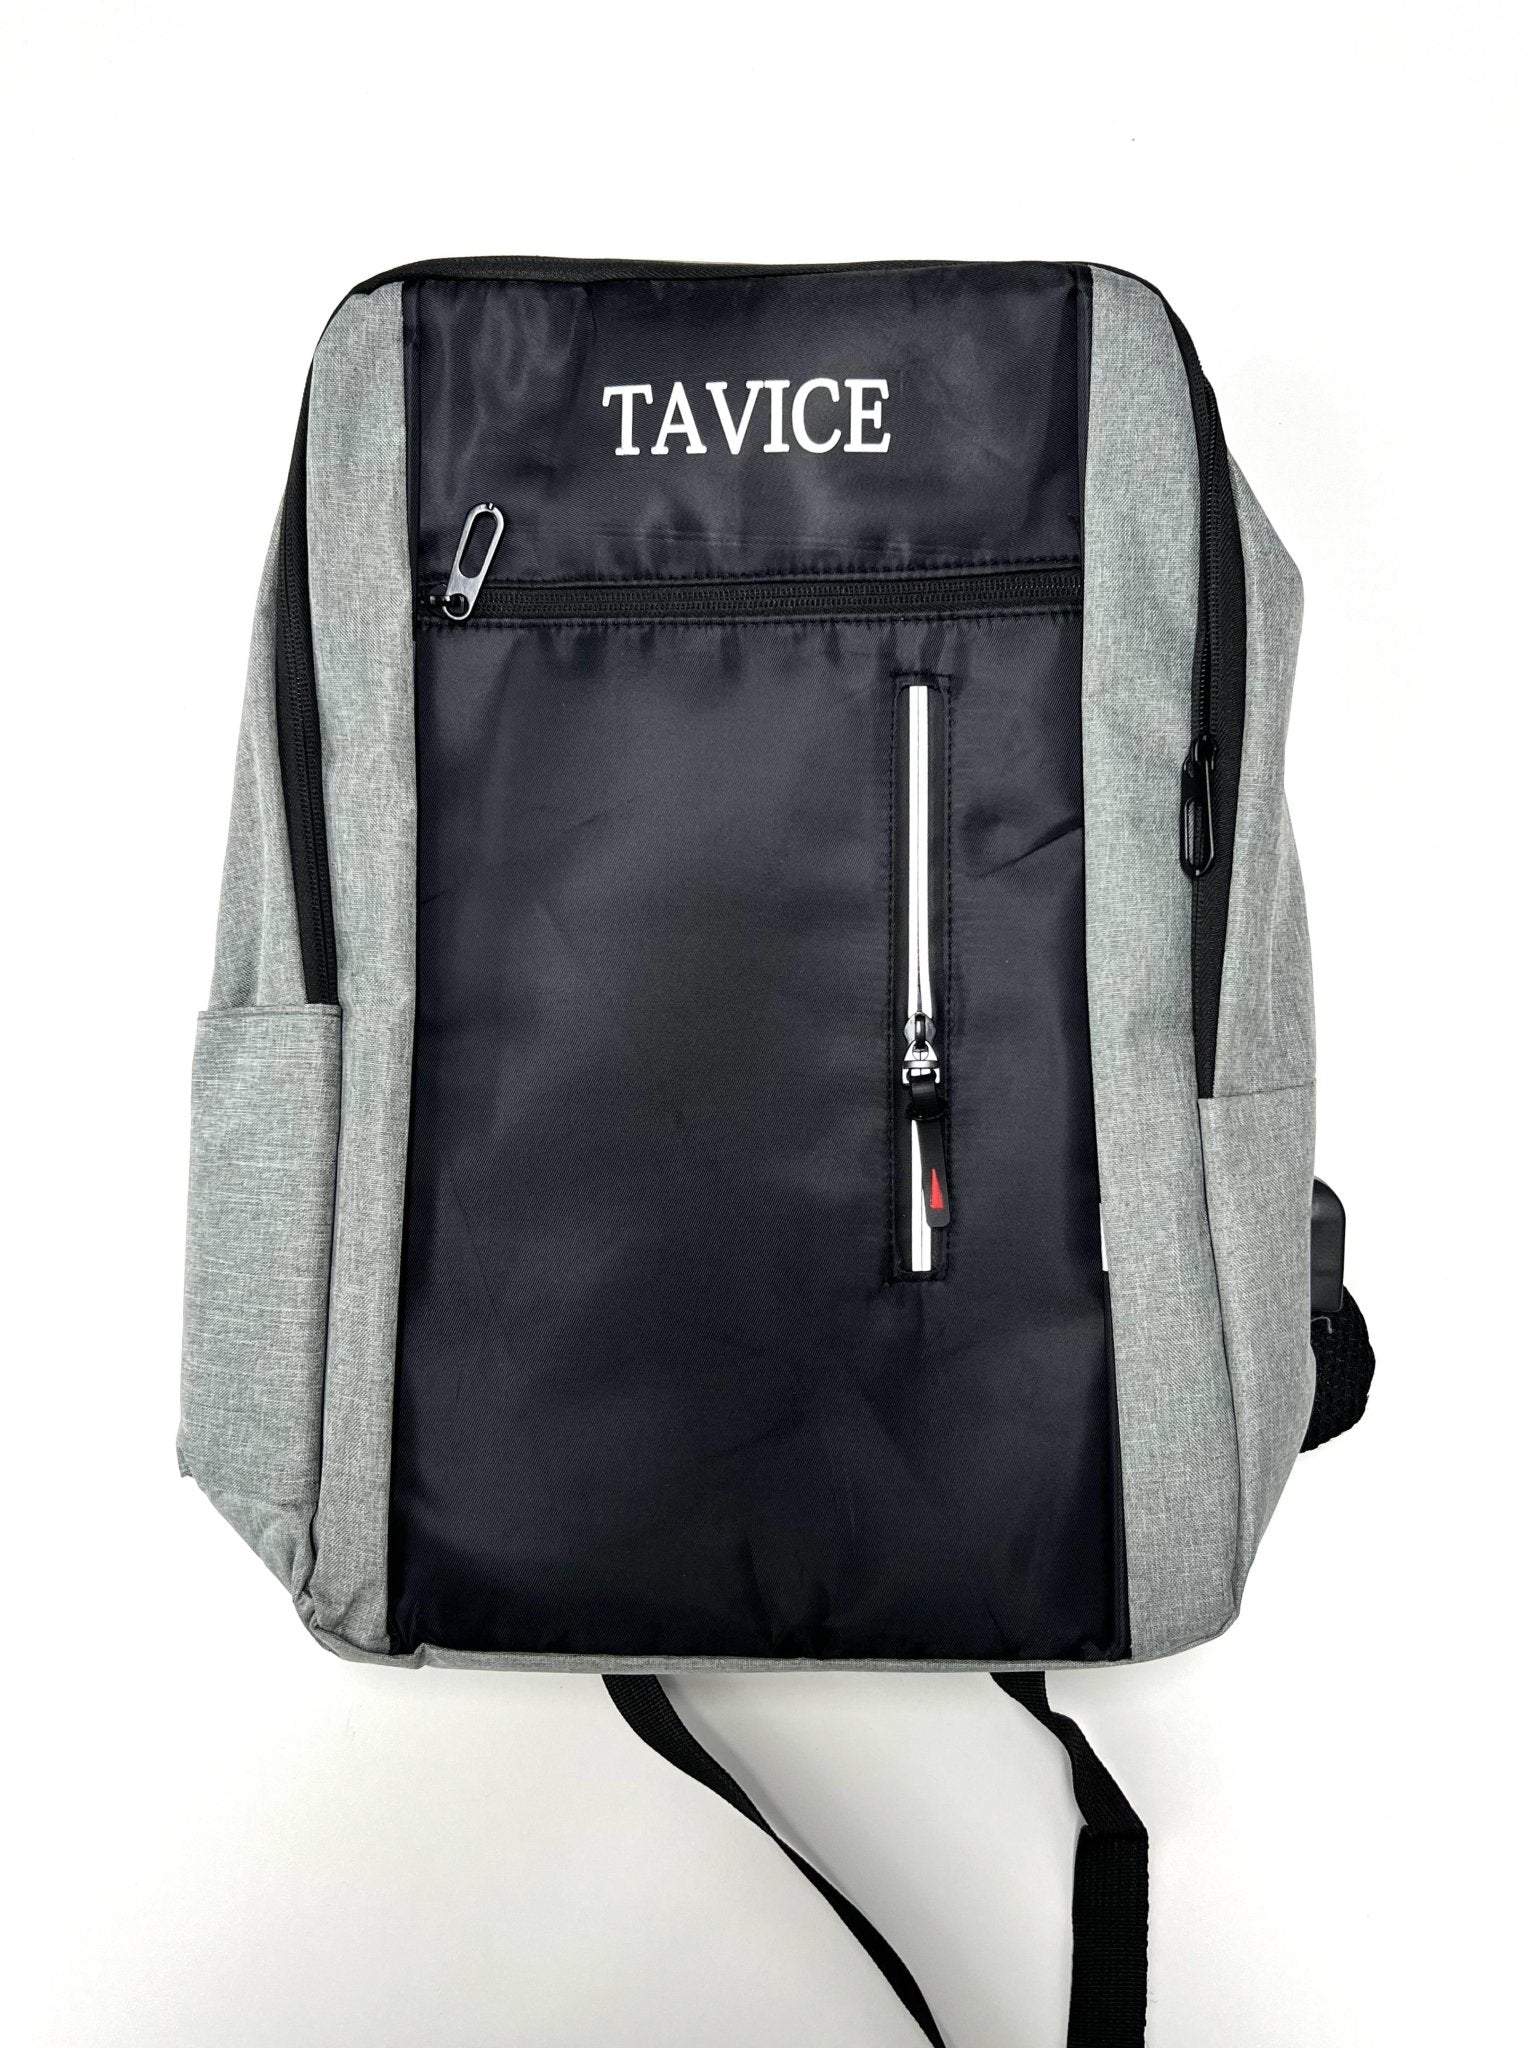 TAVICE Anti-theft Laptop Backpack, Large Capacity Business Bag For Travel, Business Nylon - Office Catch